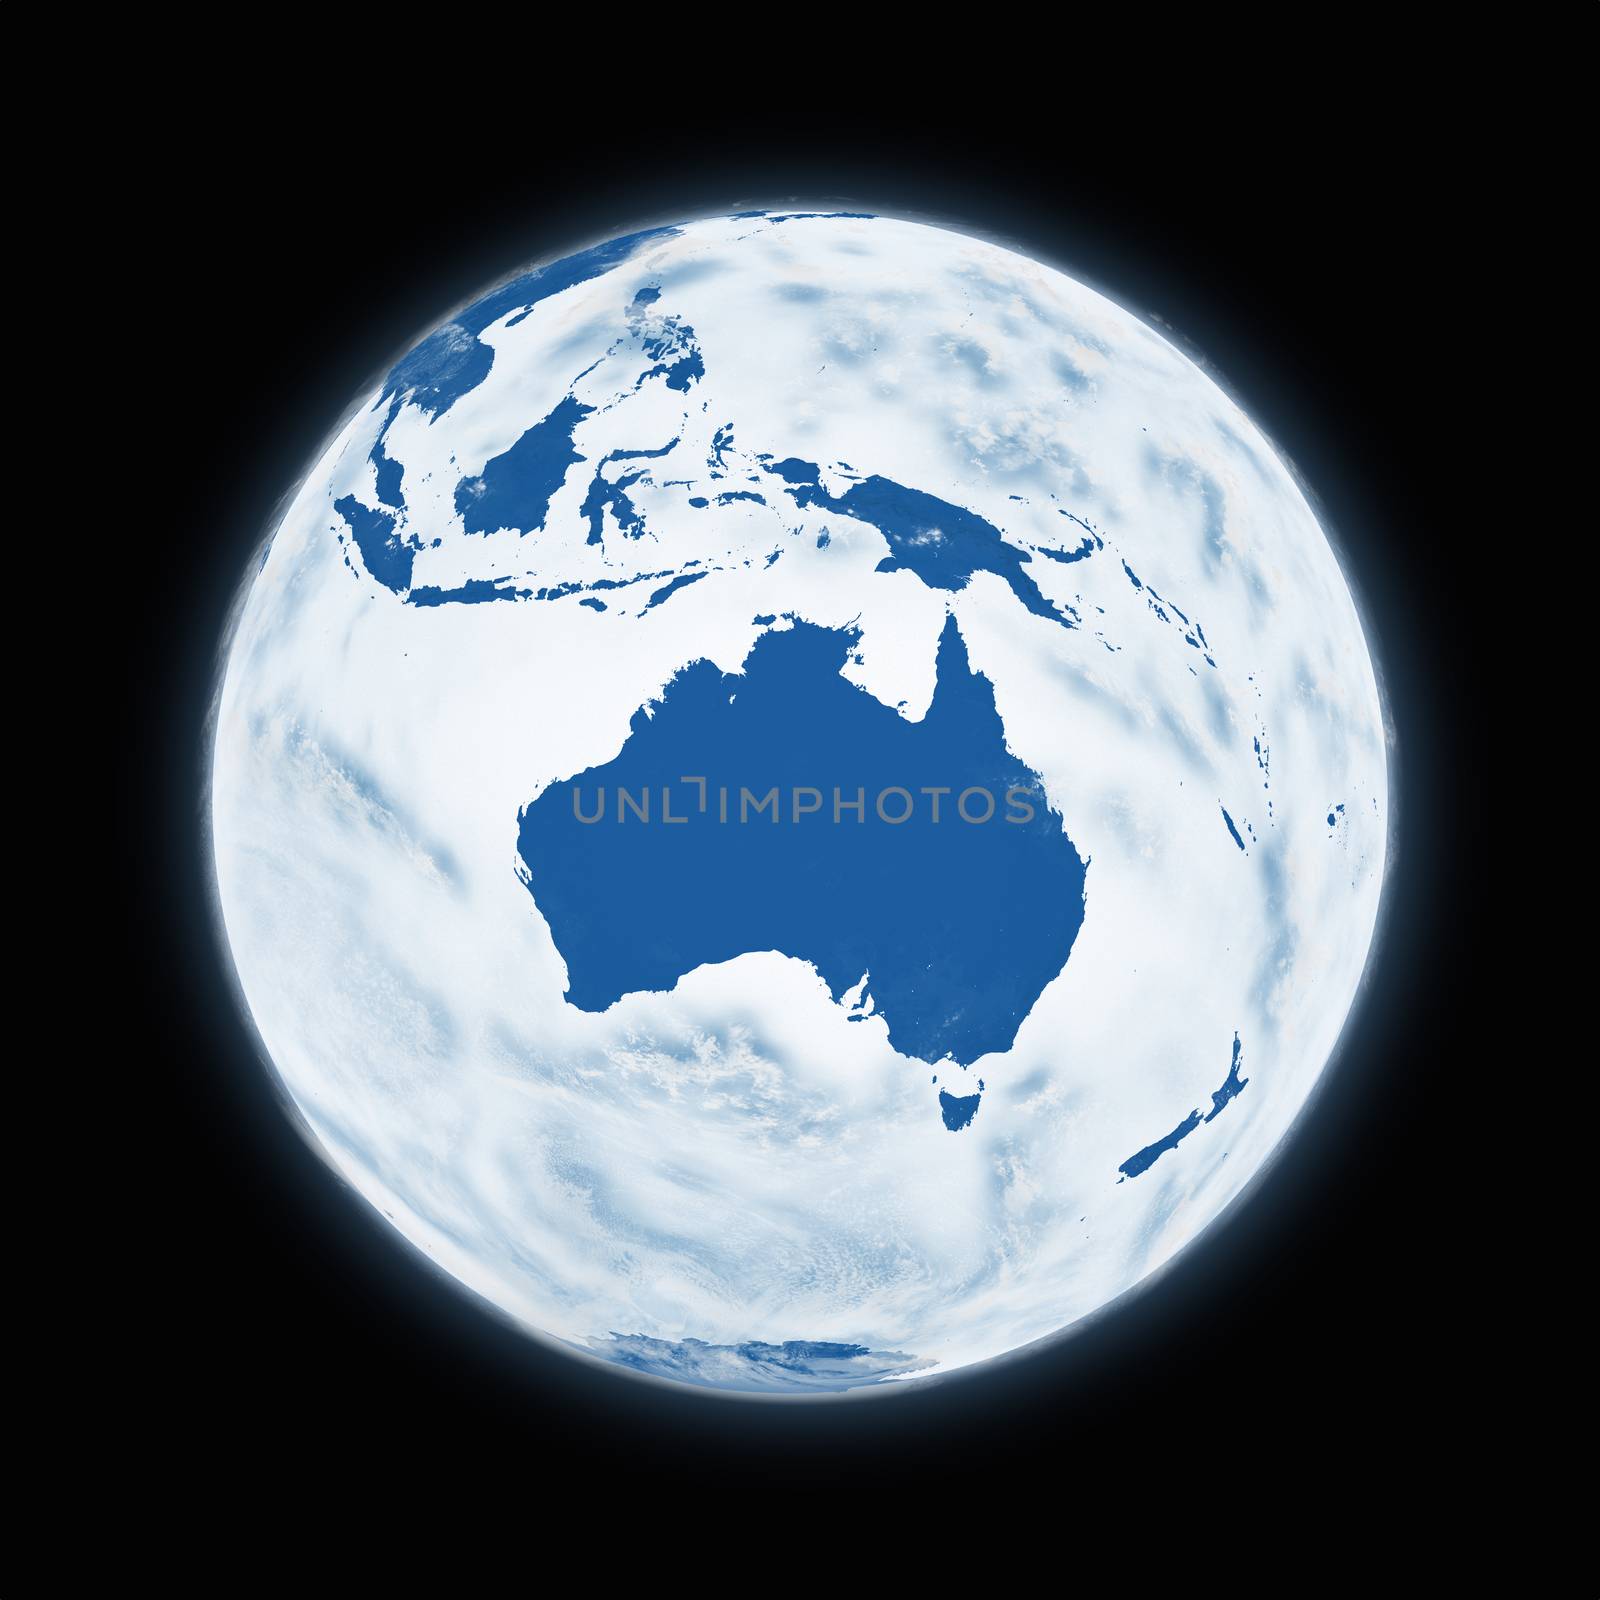 Australia on blue planet Earth isolated on black background. Highly detailed planet surface. Elements of this image furnished by NASA.